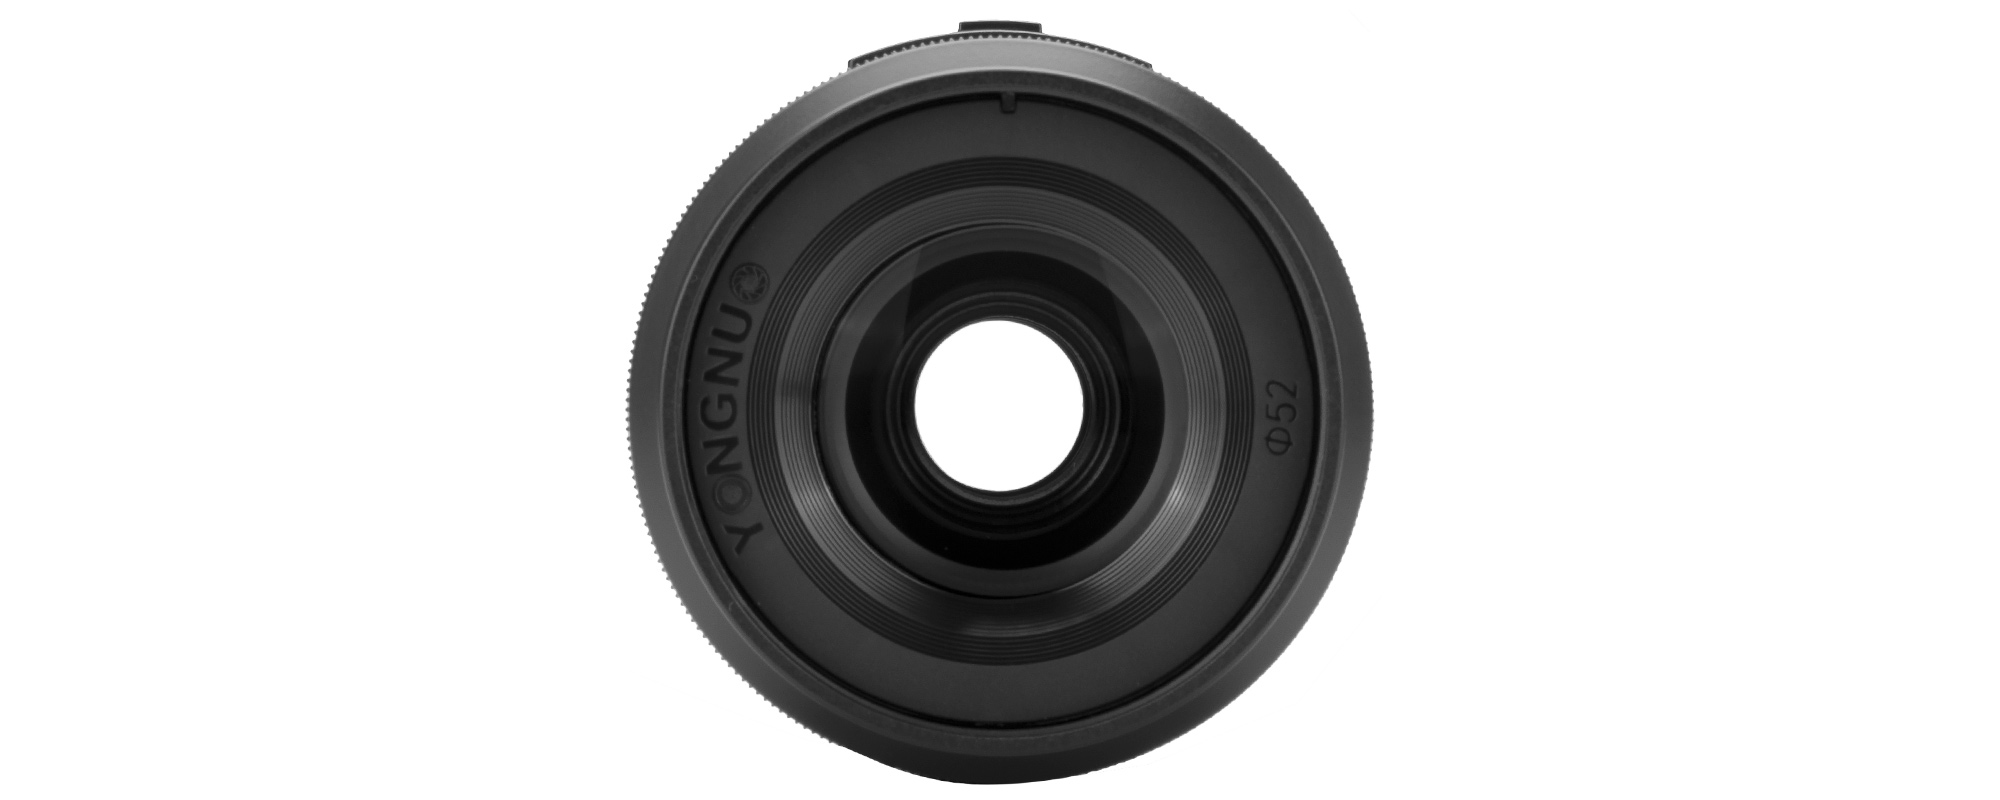 Yongnuo YN 25mm f/1.7 M Lens for Micro 4/3 - A Bright Lens for Universal Use